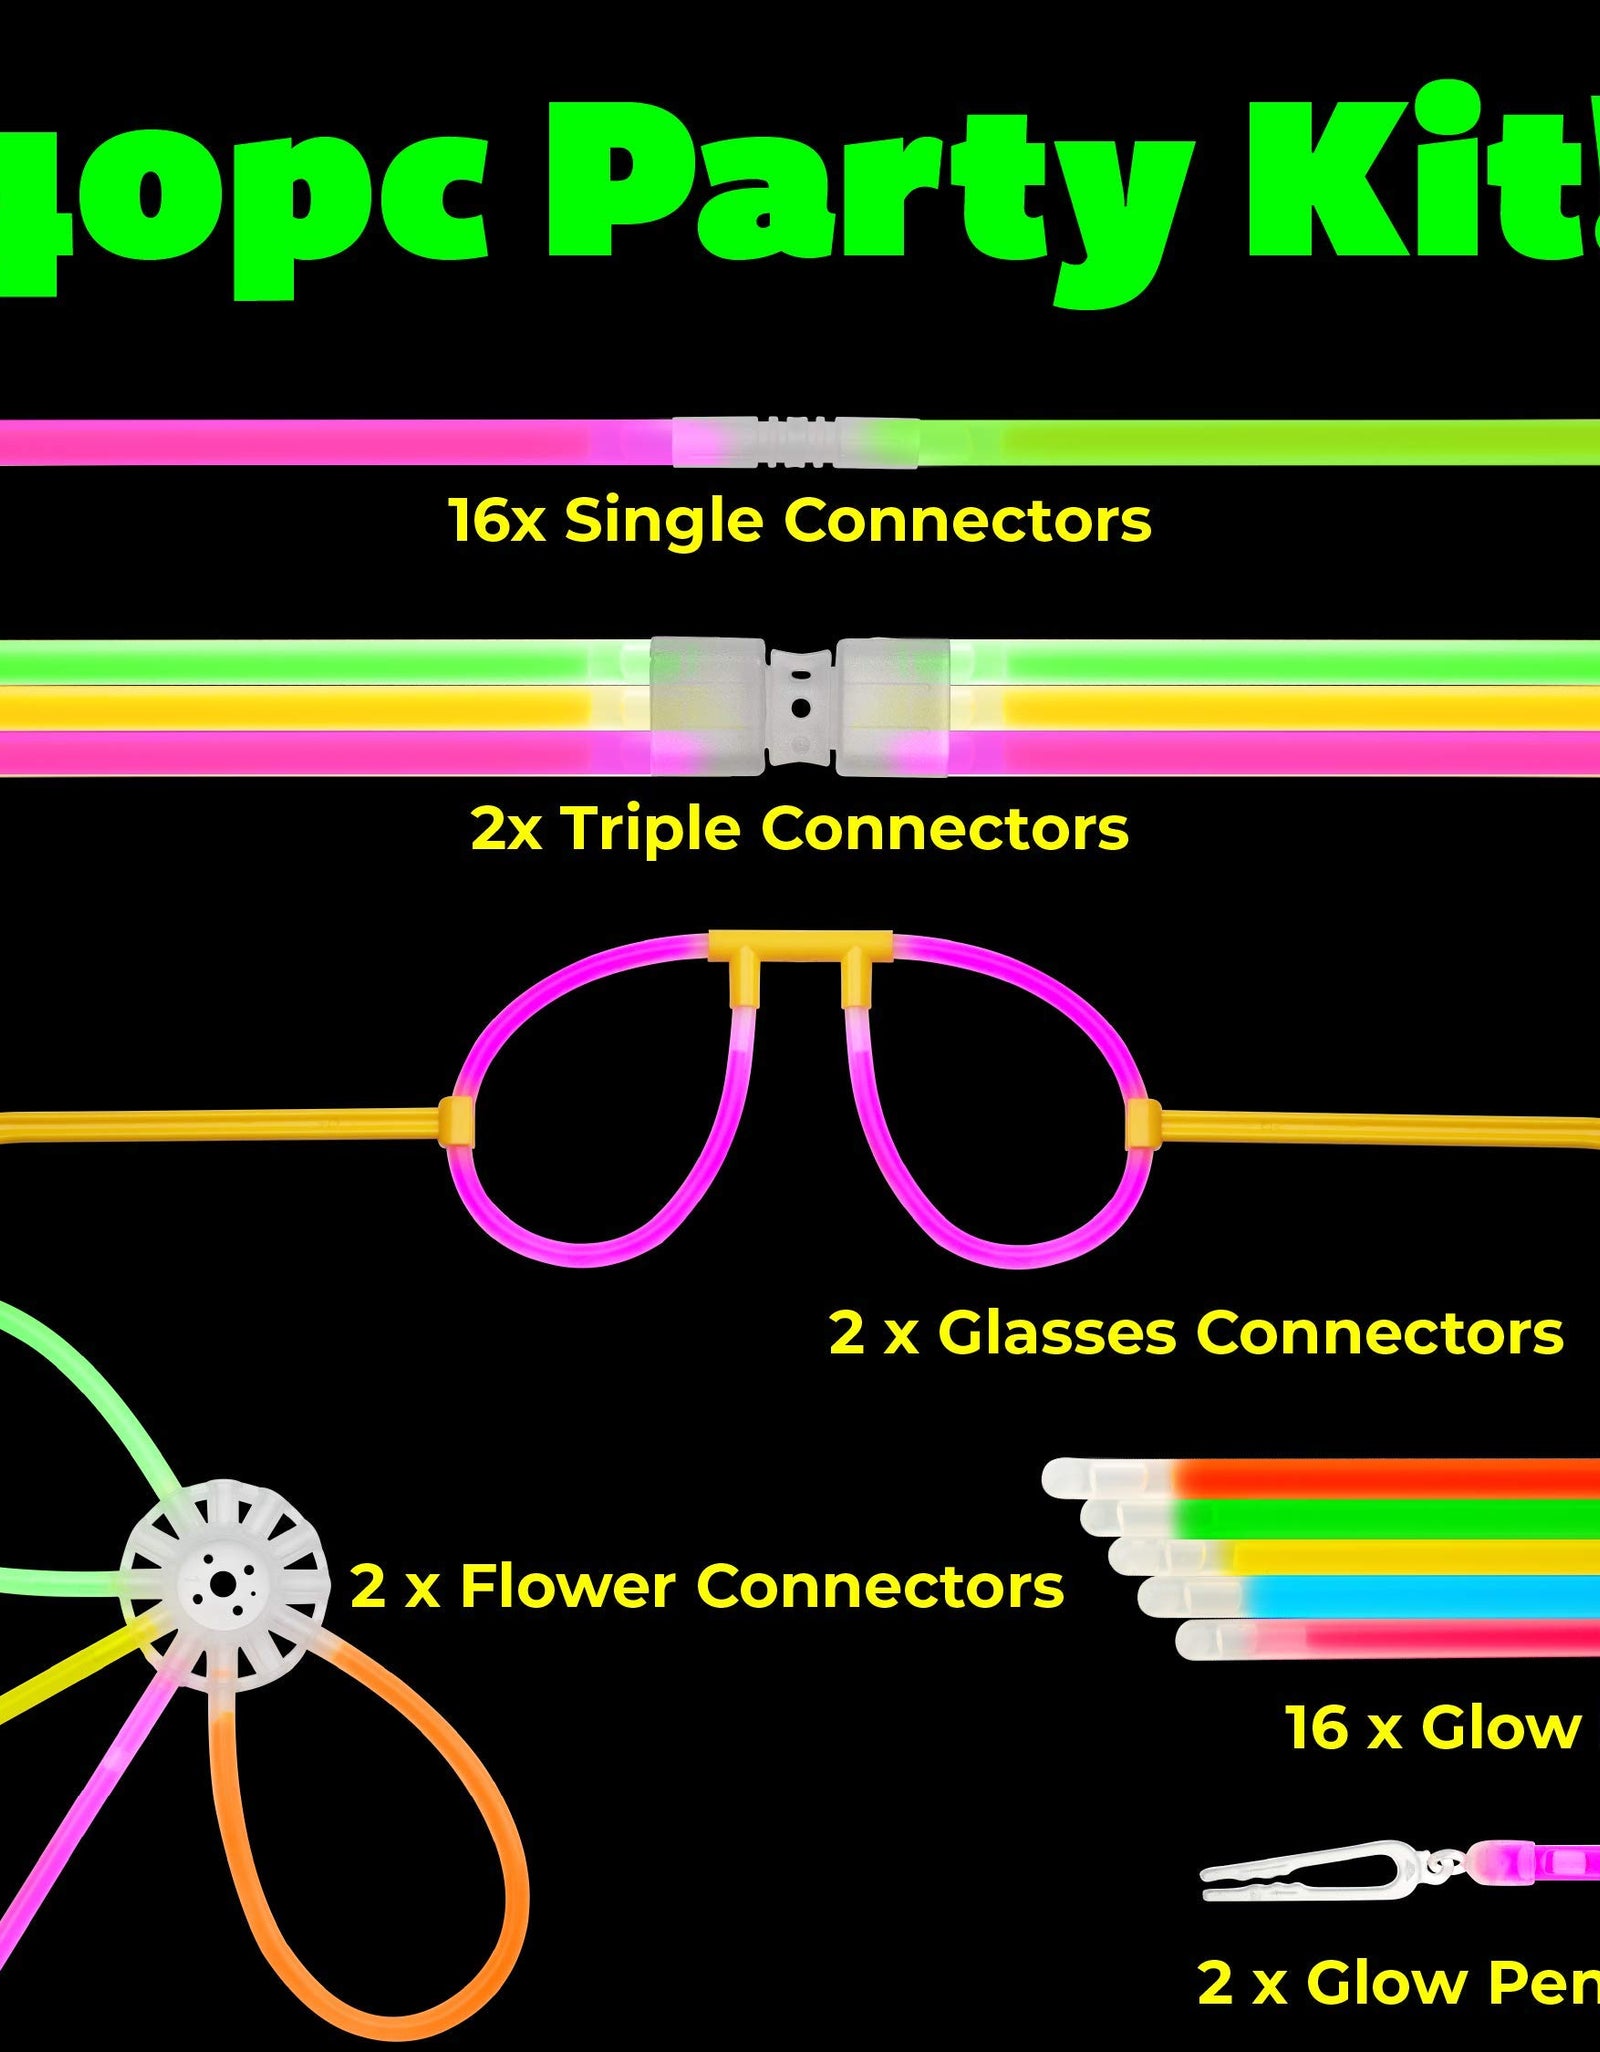 PartySticks Moondance Glow Sticks and Connectors - 40pk Glow in The Dark Party Favors with 16 Glow Sticks Party Decorations and 24 Connectors for Light Up Glasses, Glow Necklaces, Glow Bracelets